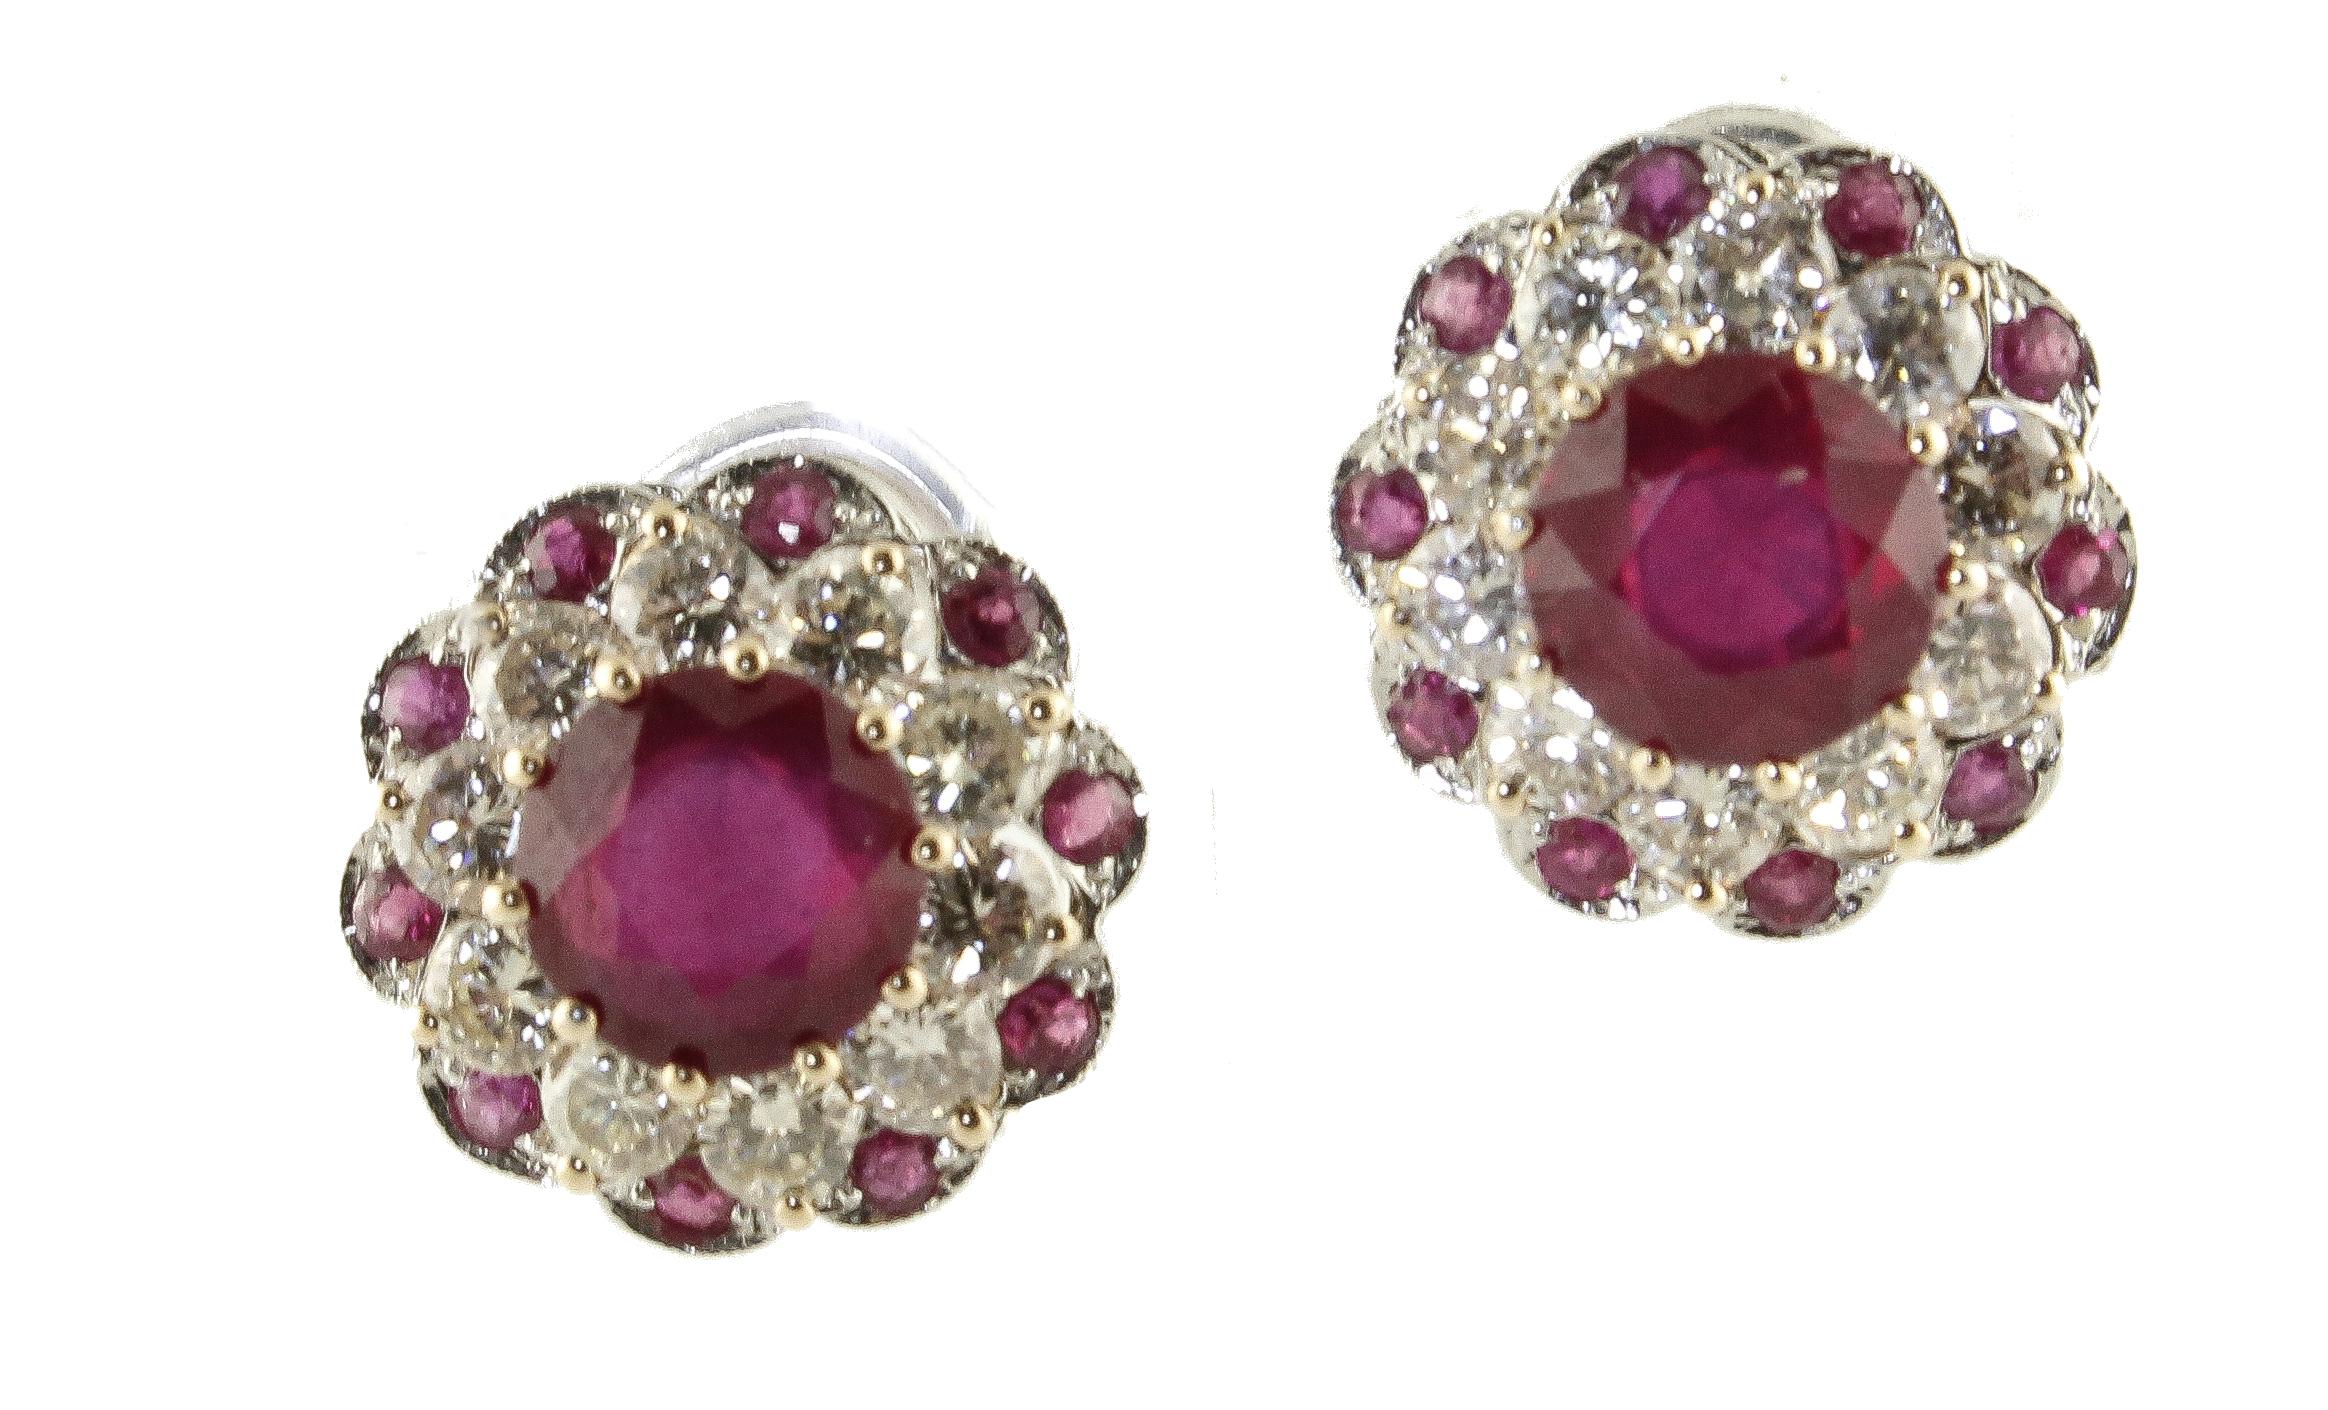 Glowing earrings in 14kt white and yellow gold composed of a ruby in the center surrounded by diamonds and rubies.
Diamonds 2.05 kt
Rubies 5.29 kt
Tot.Weight 6.10 gr
R.F hgah

For any enquires, please contact the seller through the message center.